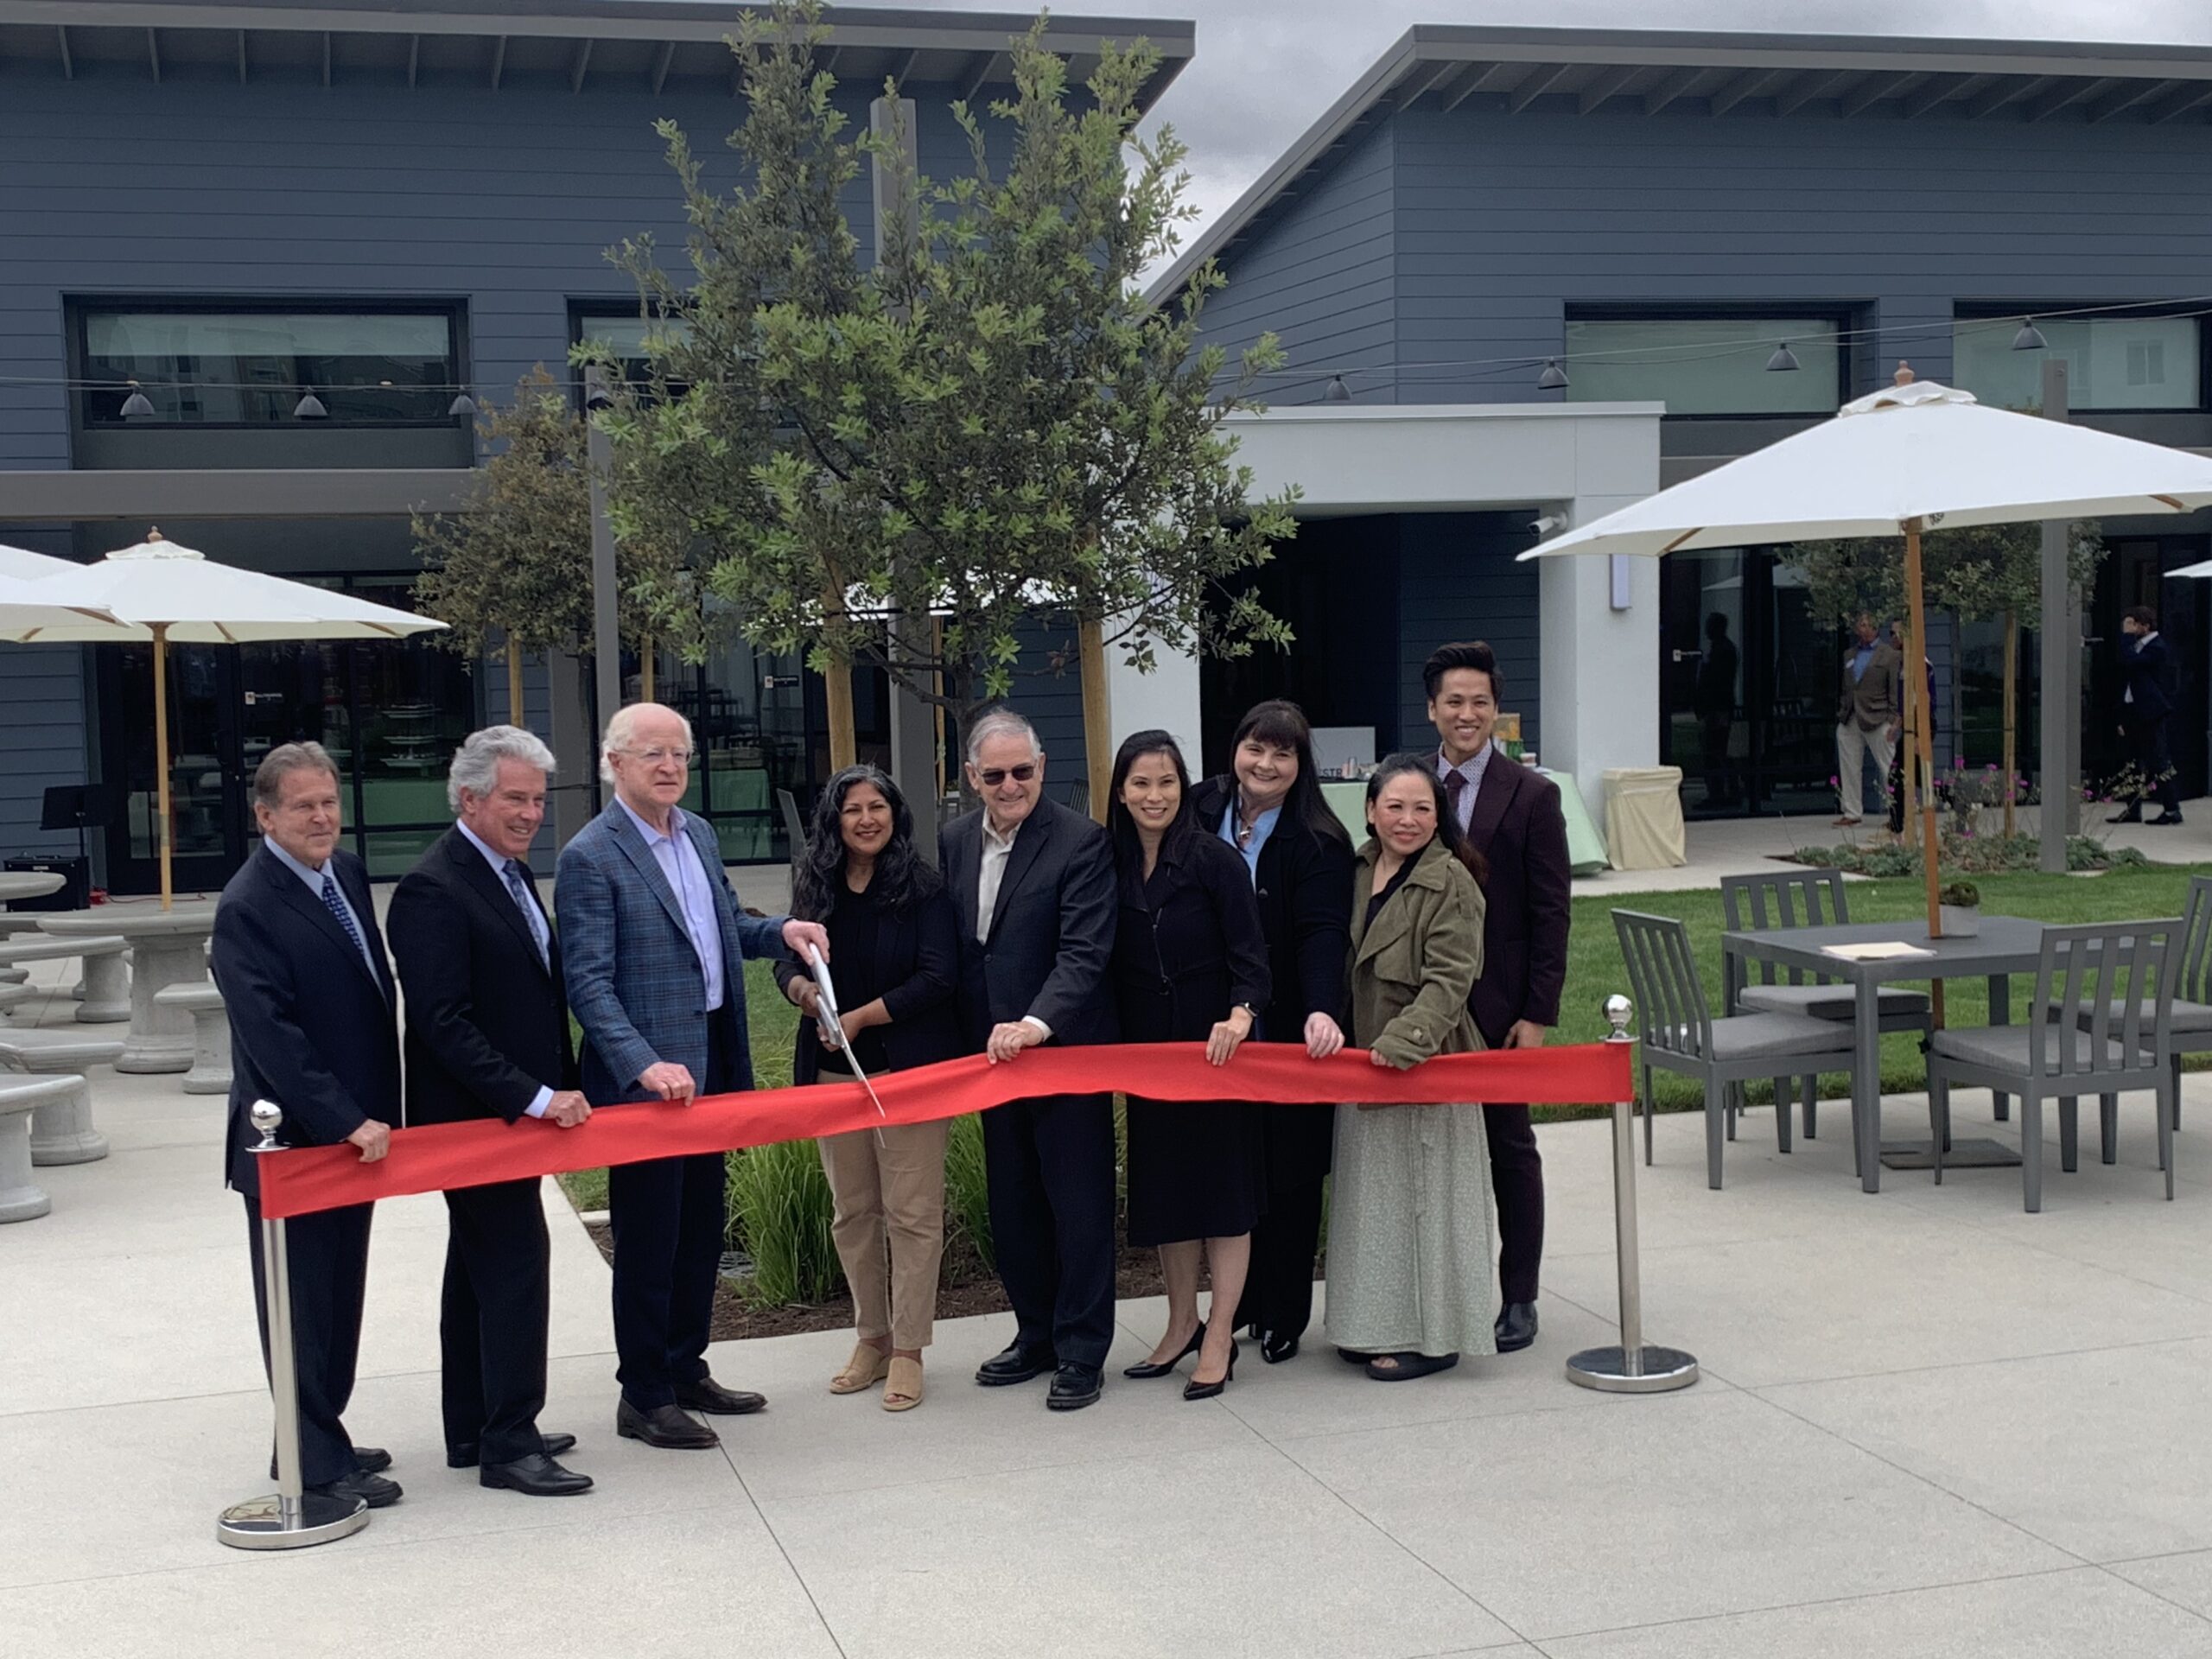 City of Irvine leaders open Belaira, a new low-income apartment community located in Great Park Neighborhoods.